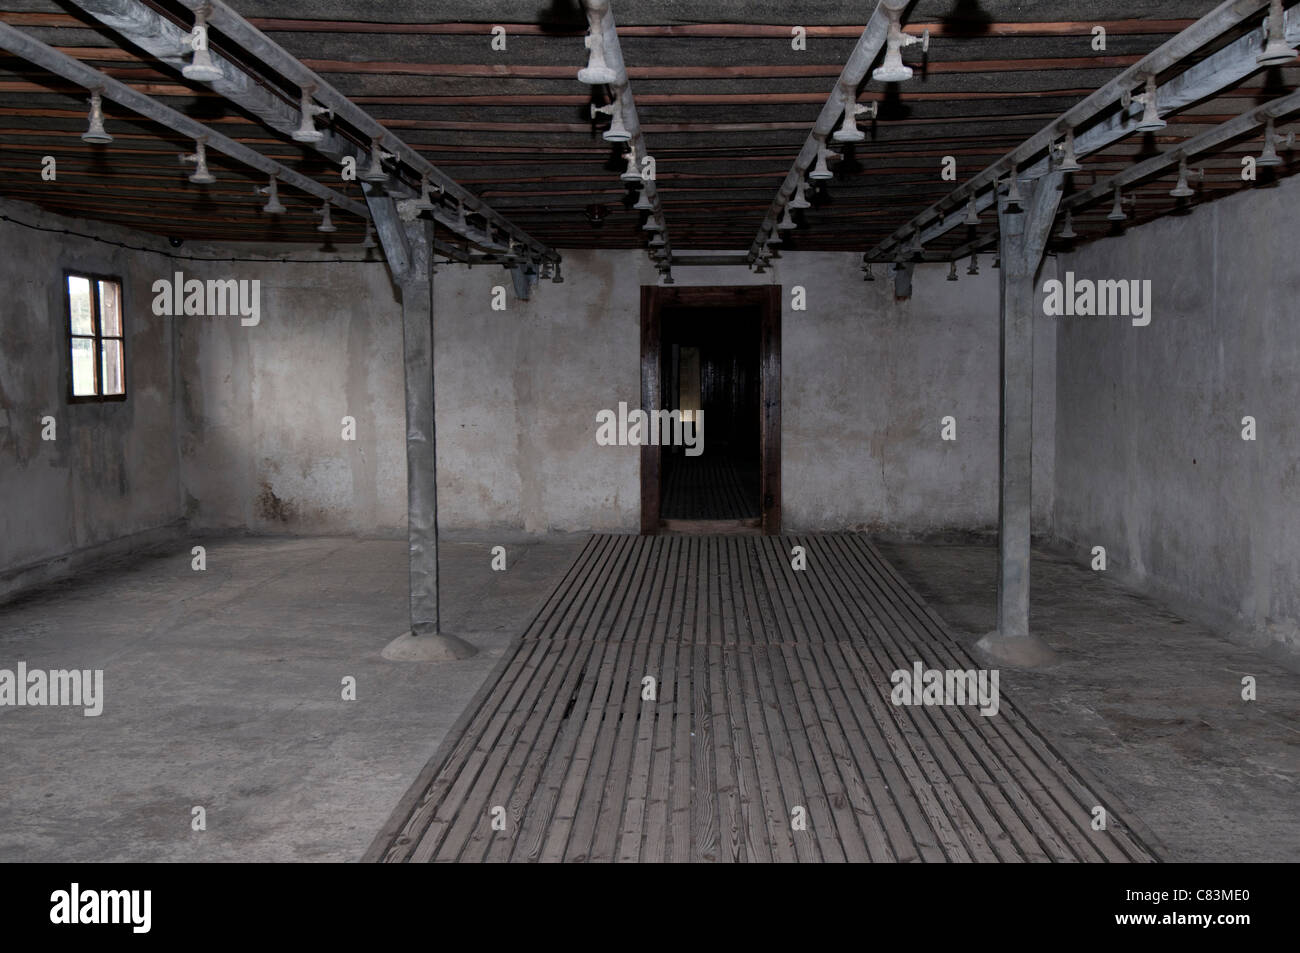 Showering facility in the delousing compound for newly arrived inmates, Majdanek concentration camp, Lublin, Poland Stock Photo